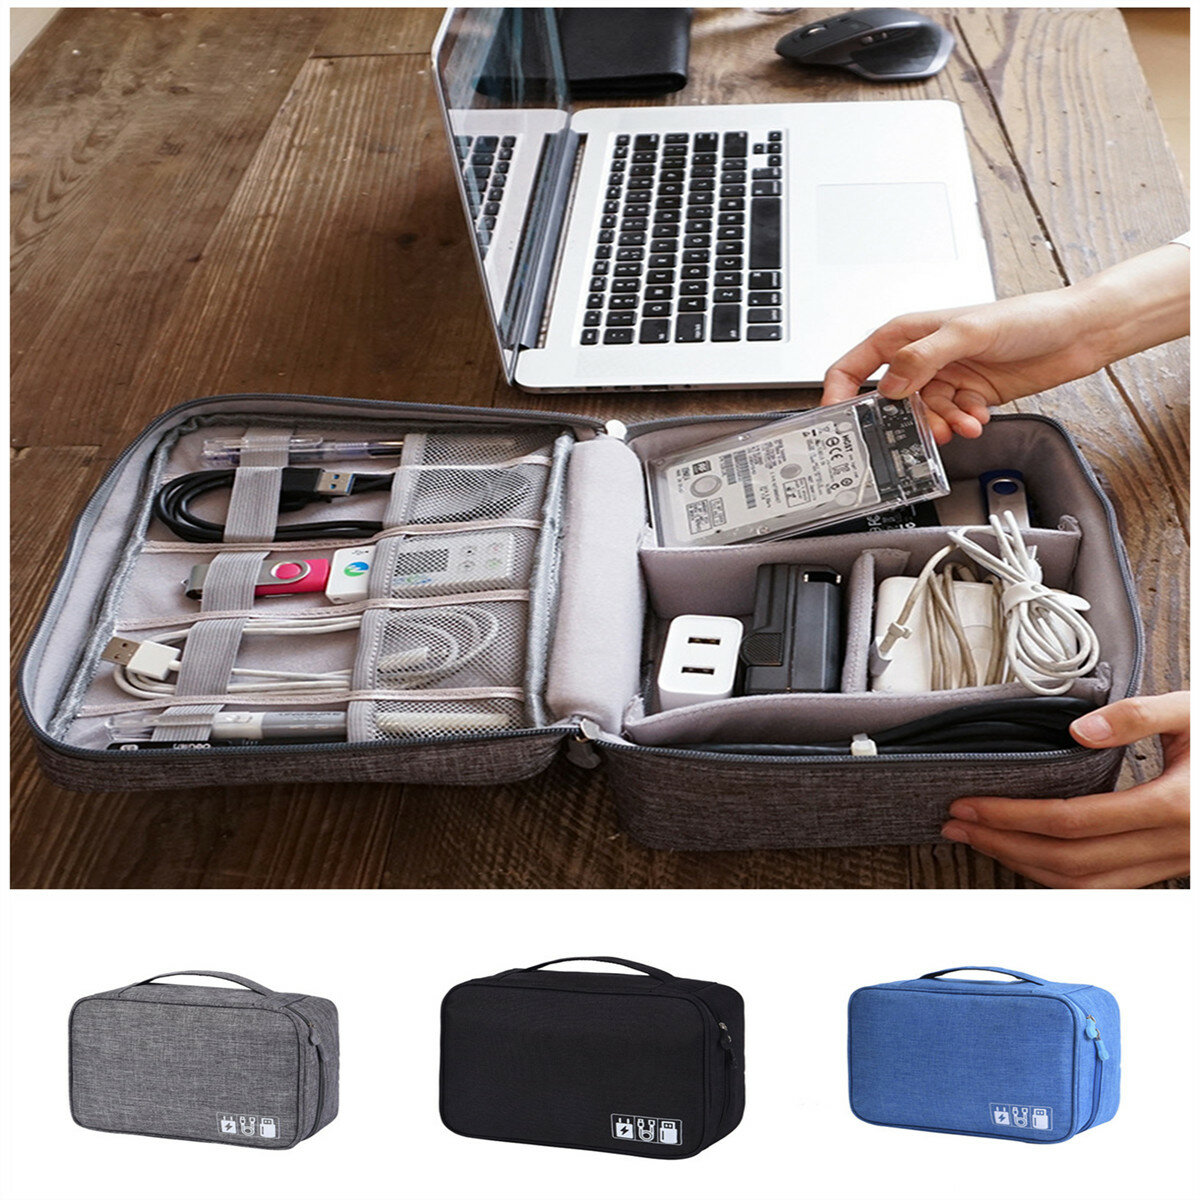 IPRee® Multifunctional Digital Storage Bag Cable Bag USB Cable Charger Earphone Organizer Outdoor Travel